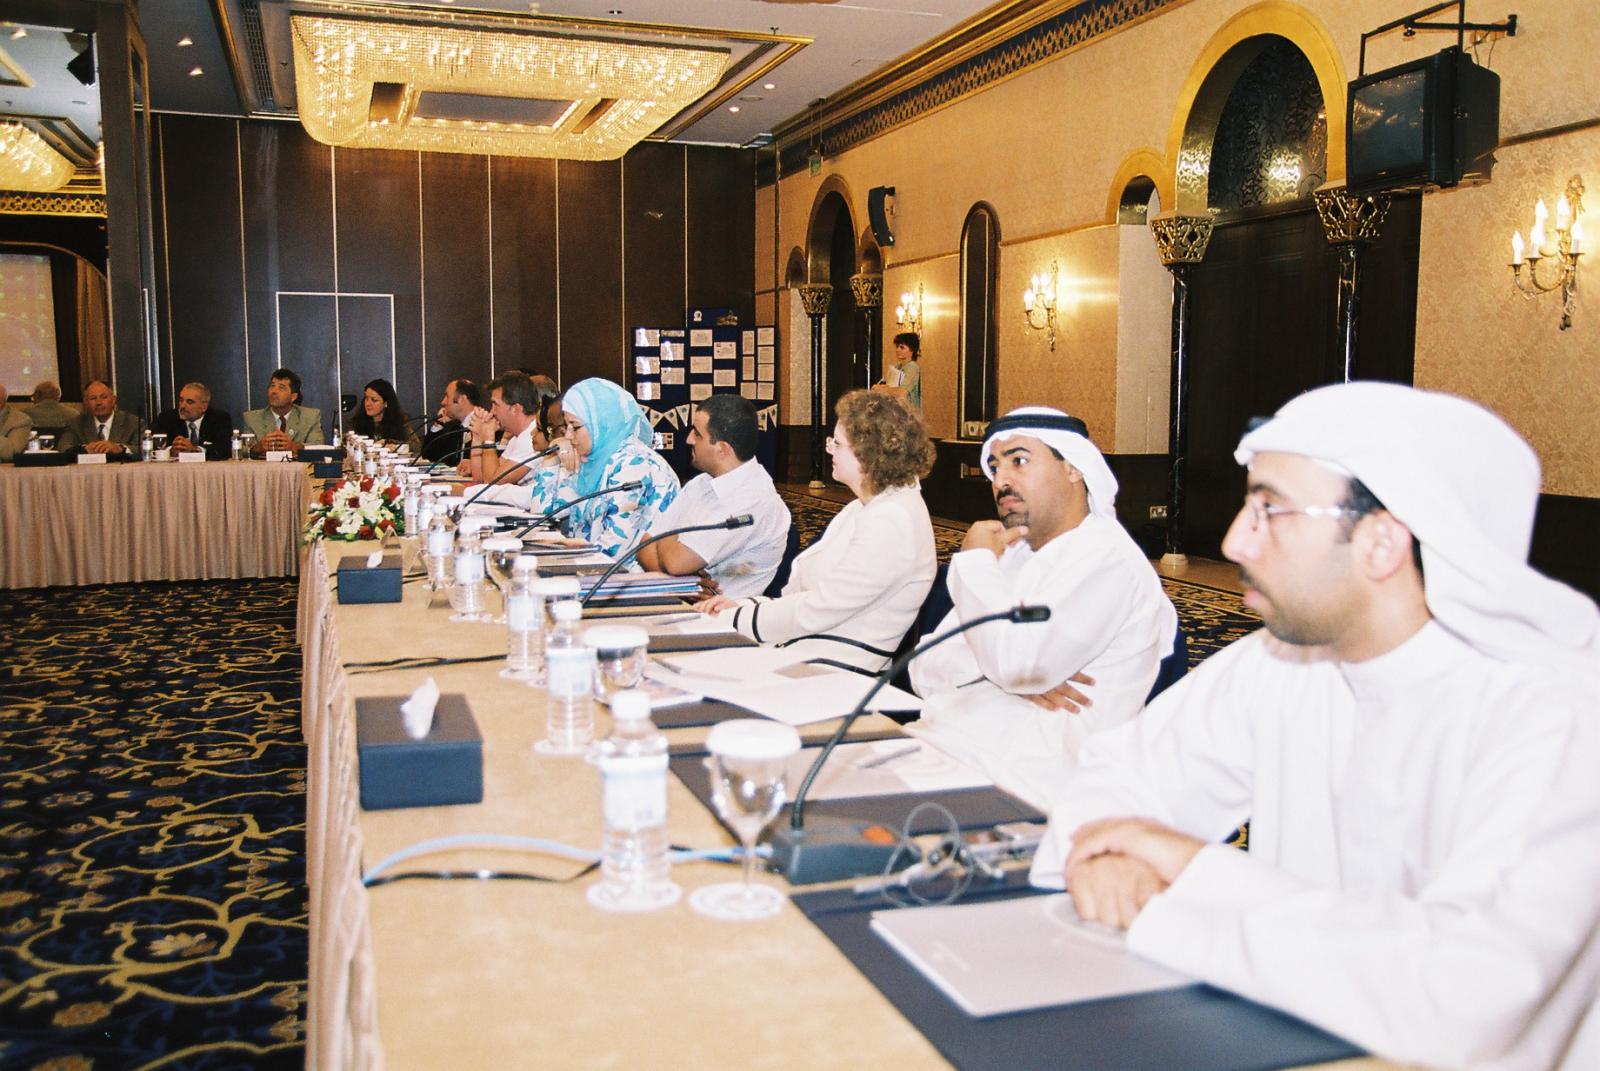 Symposium on "Faconry: A World Heritage" during 13-15 September 2005 in Hilton Hotel in Abu Dhabi in